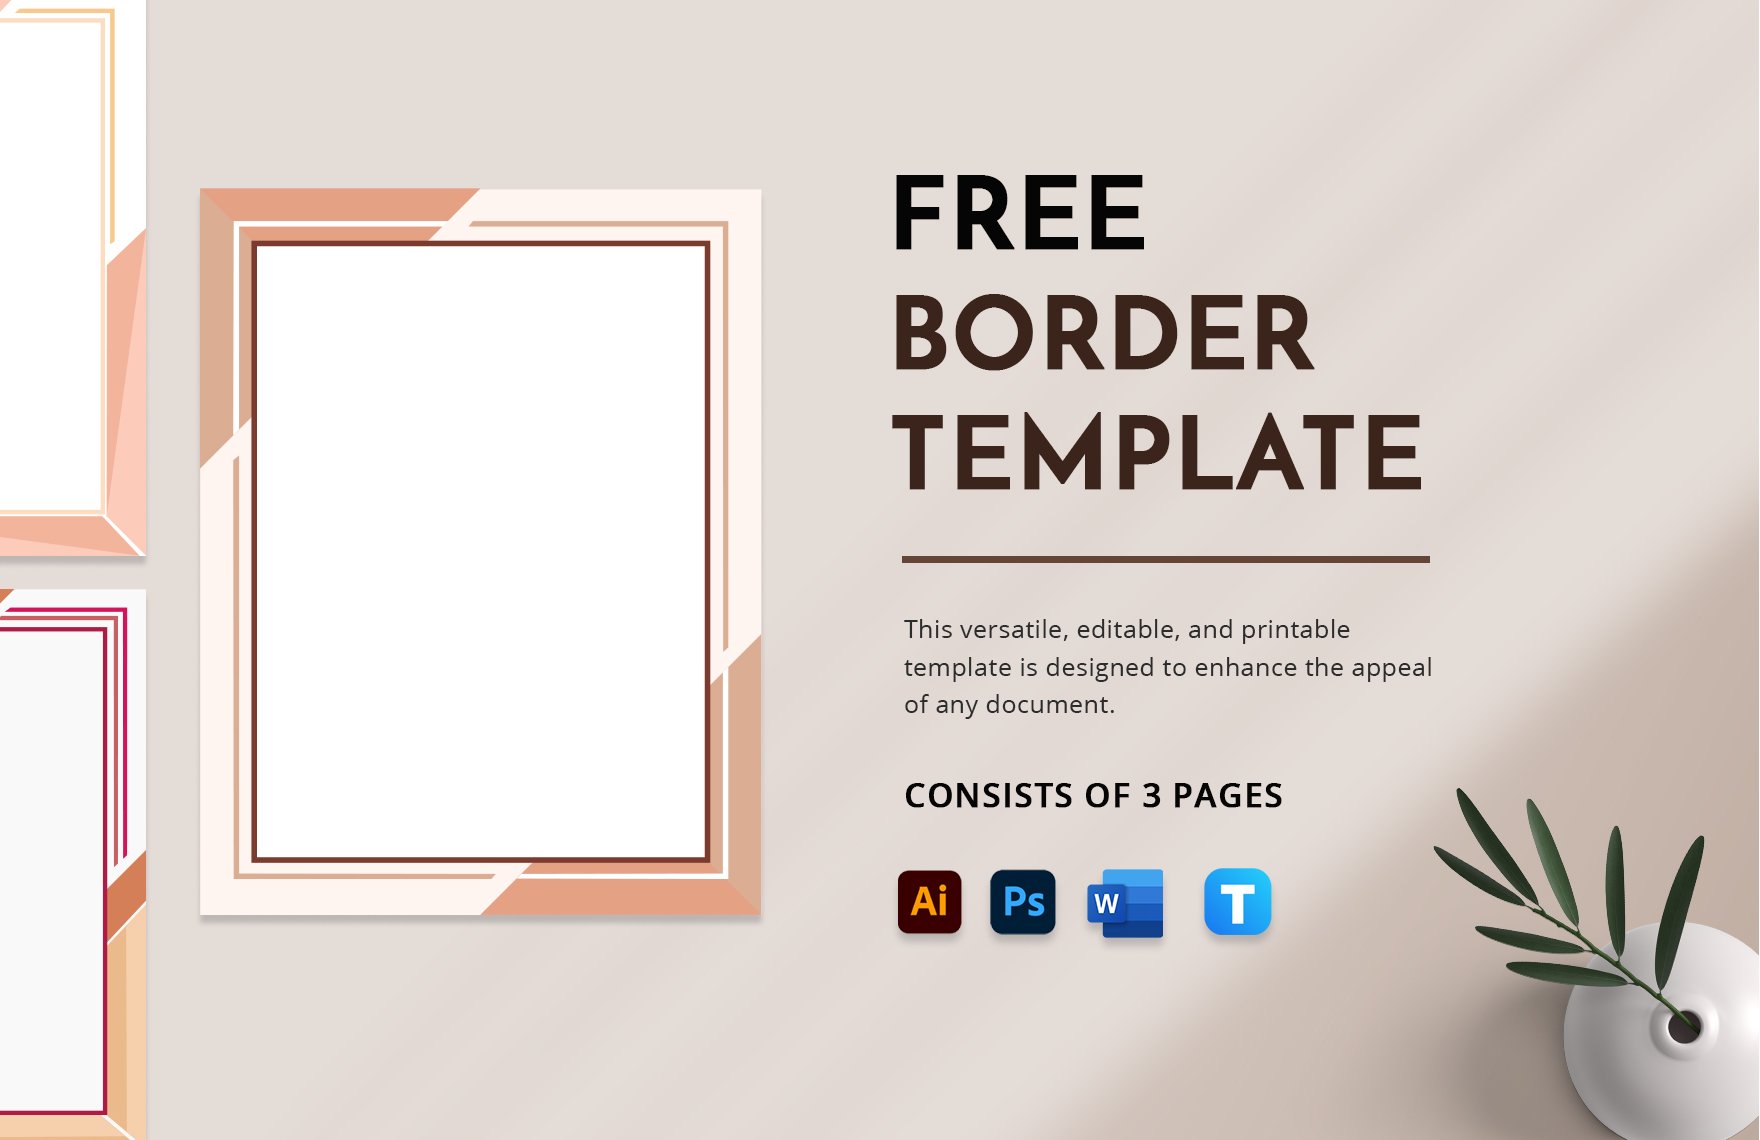 Decorative Page Border Template in Portable Documents, MS Word,  Illustrator, GDocsLink - Download